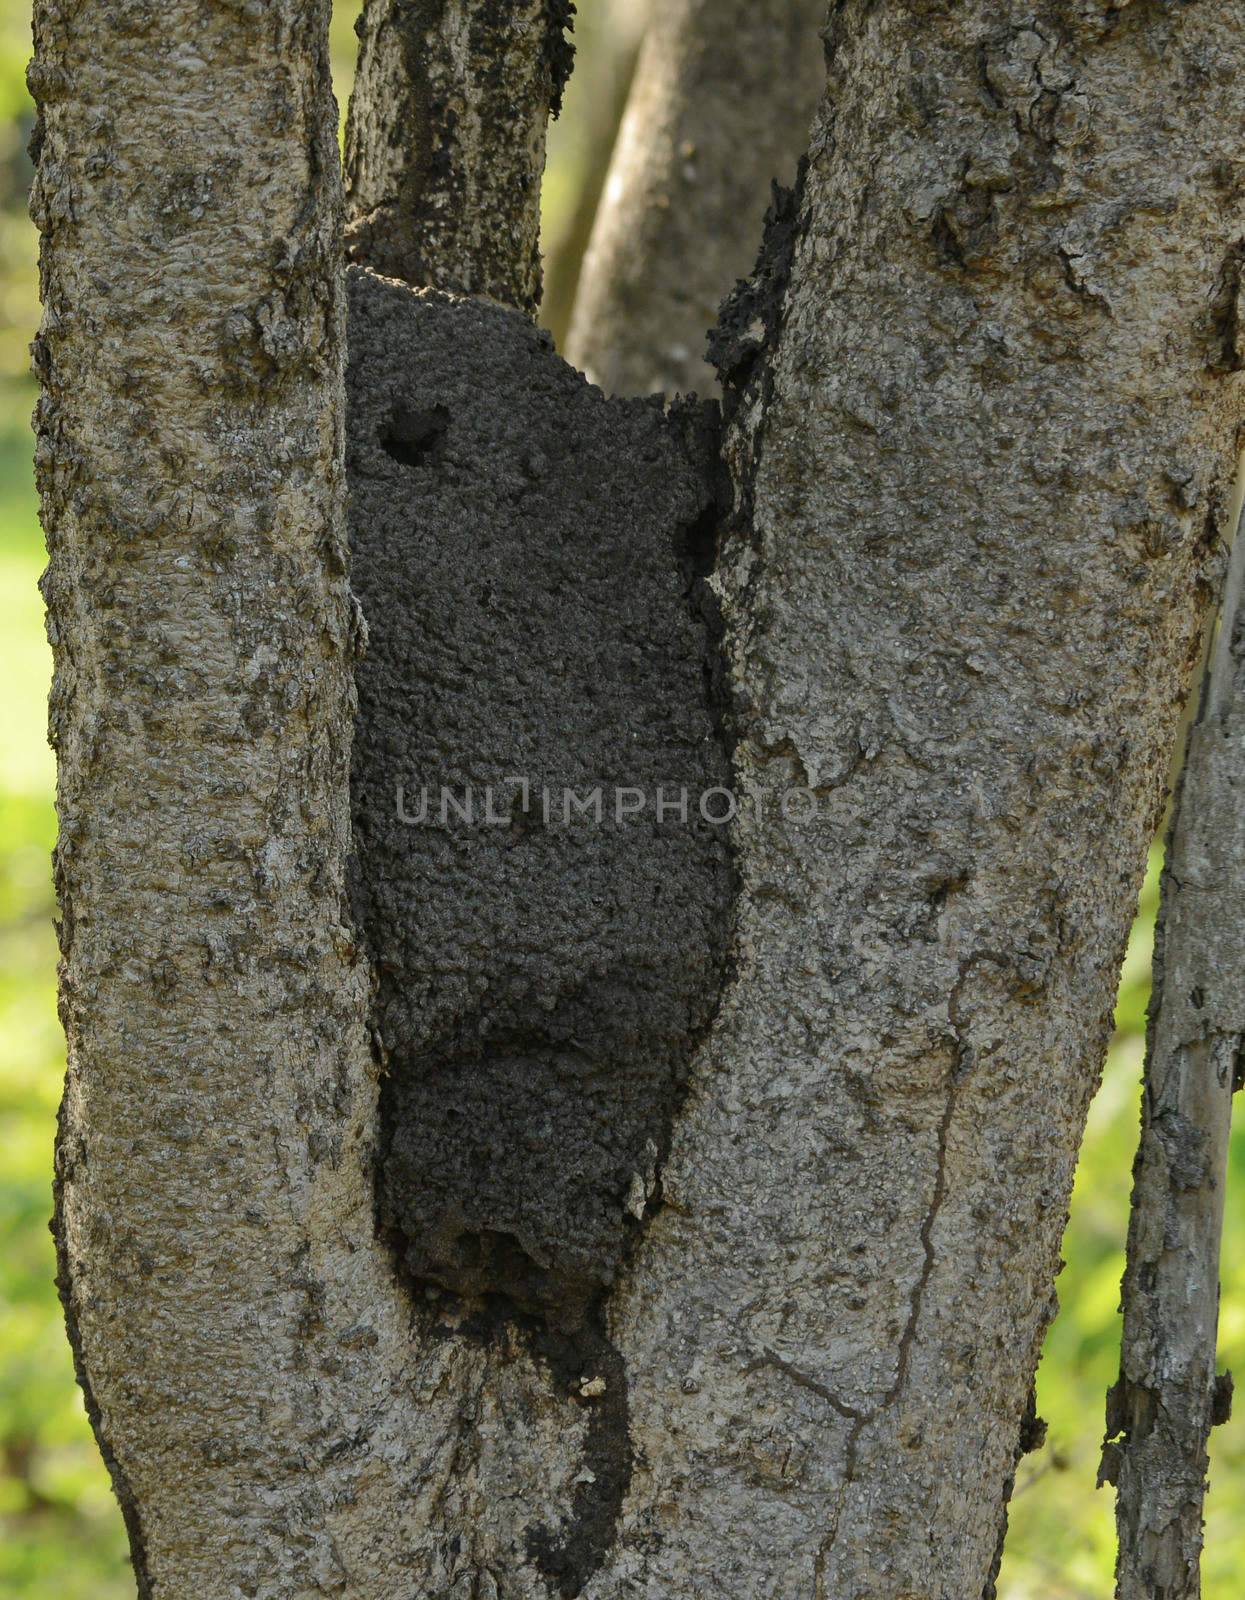 termite nest nestled in a tree in nature